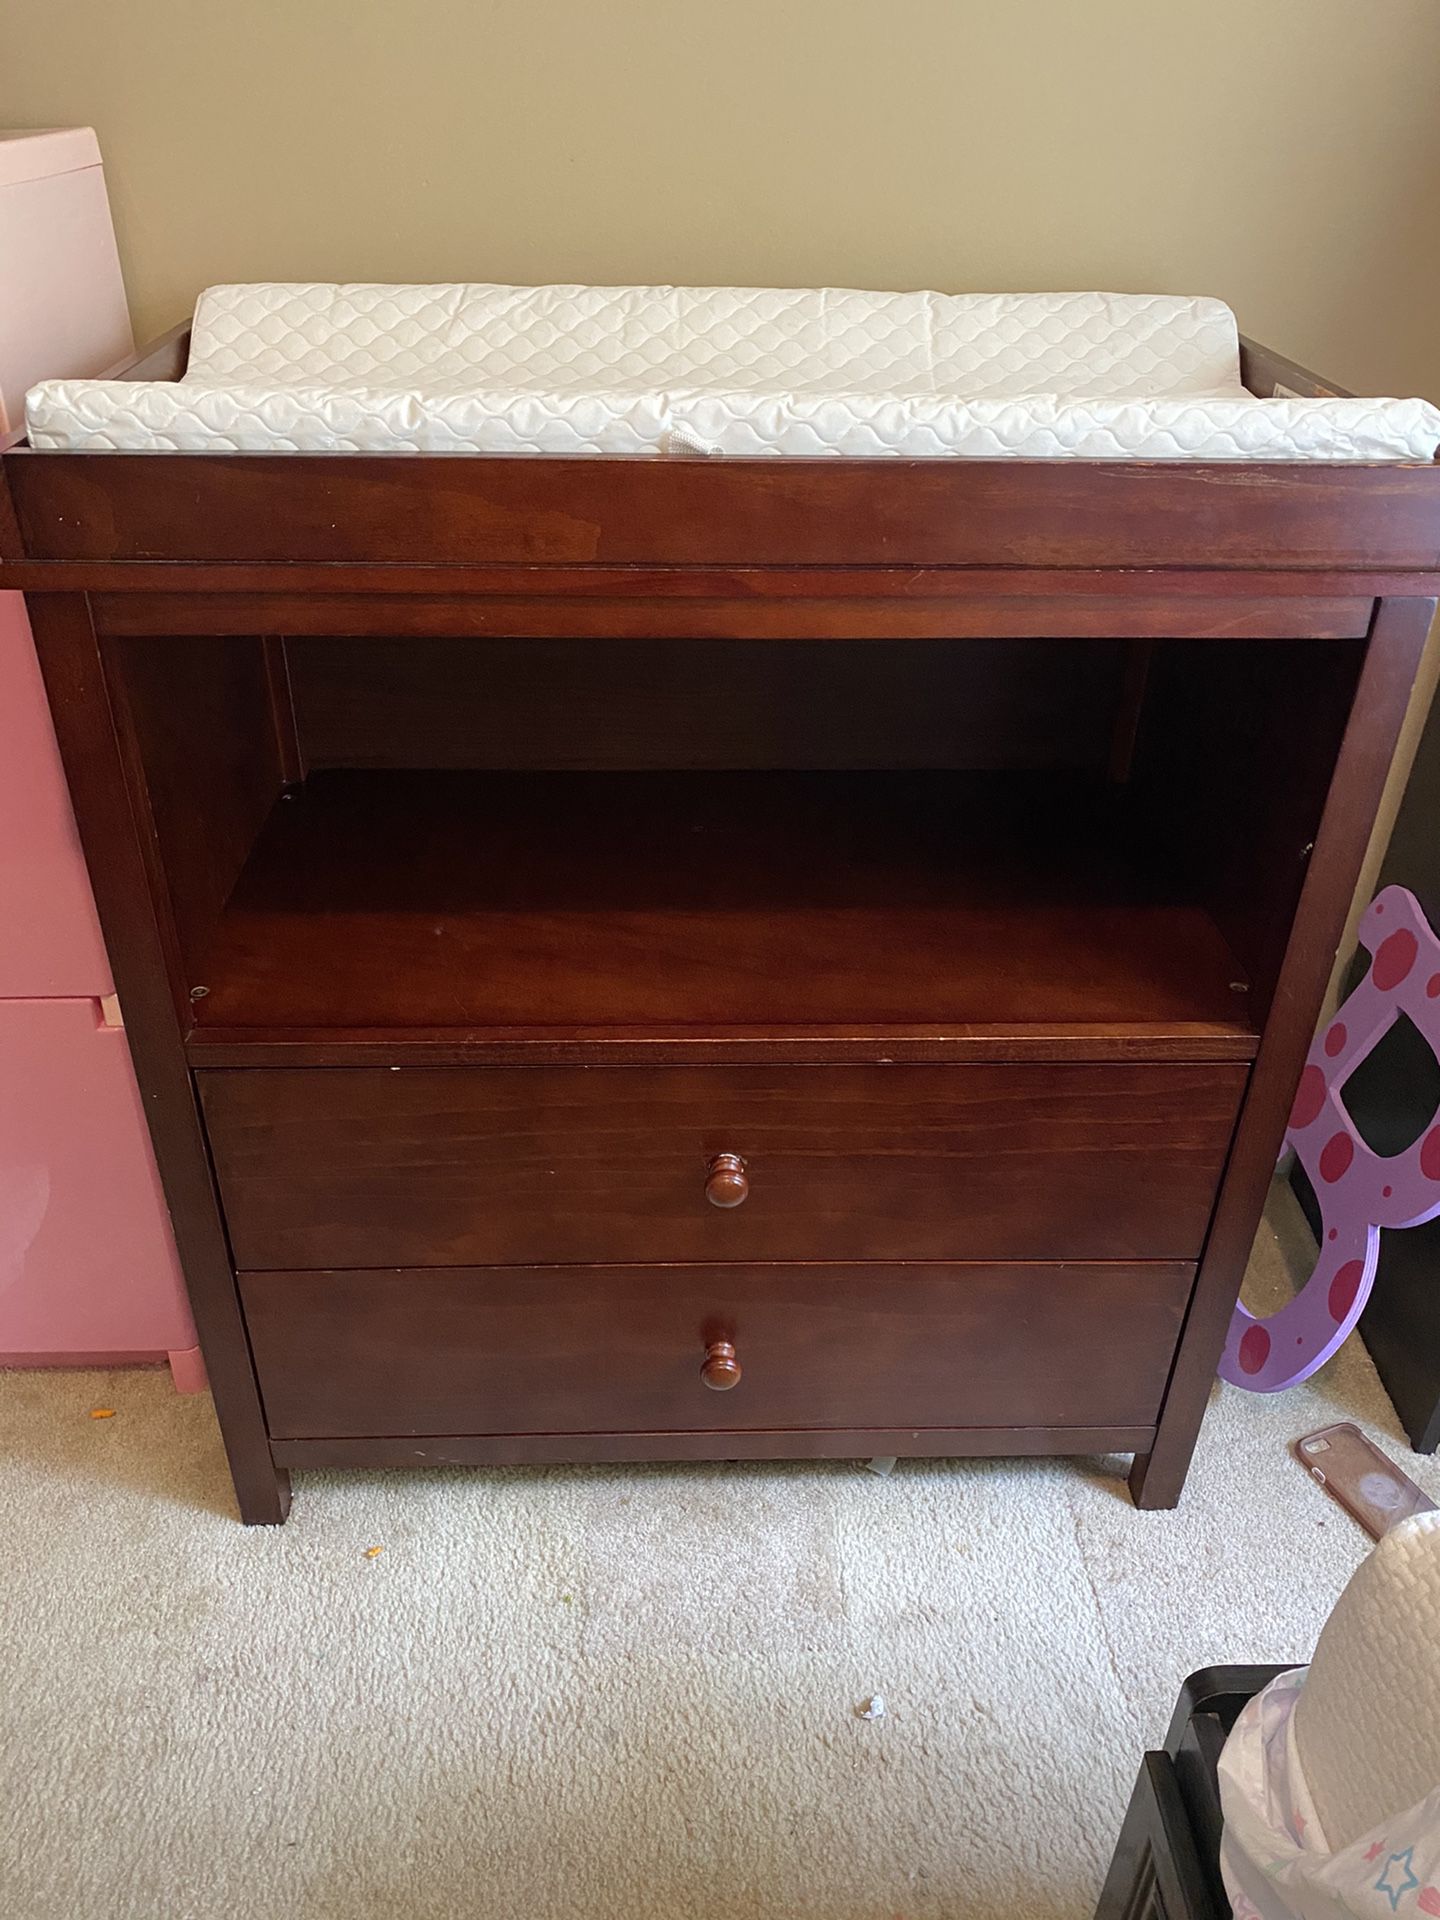 Baby changing table good condition I don’t use it and need it gone because I’m moving